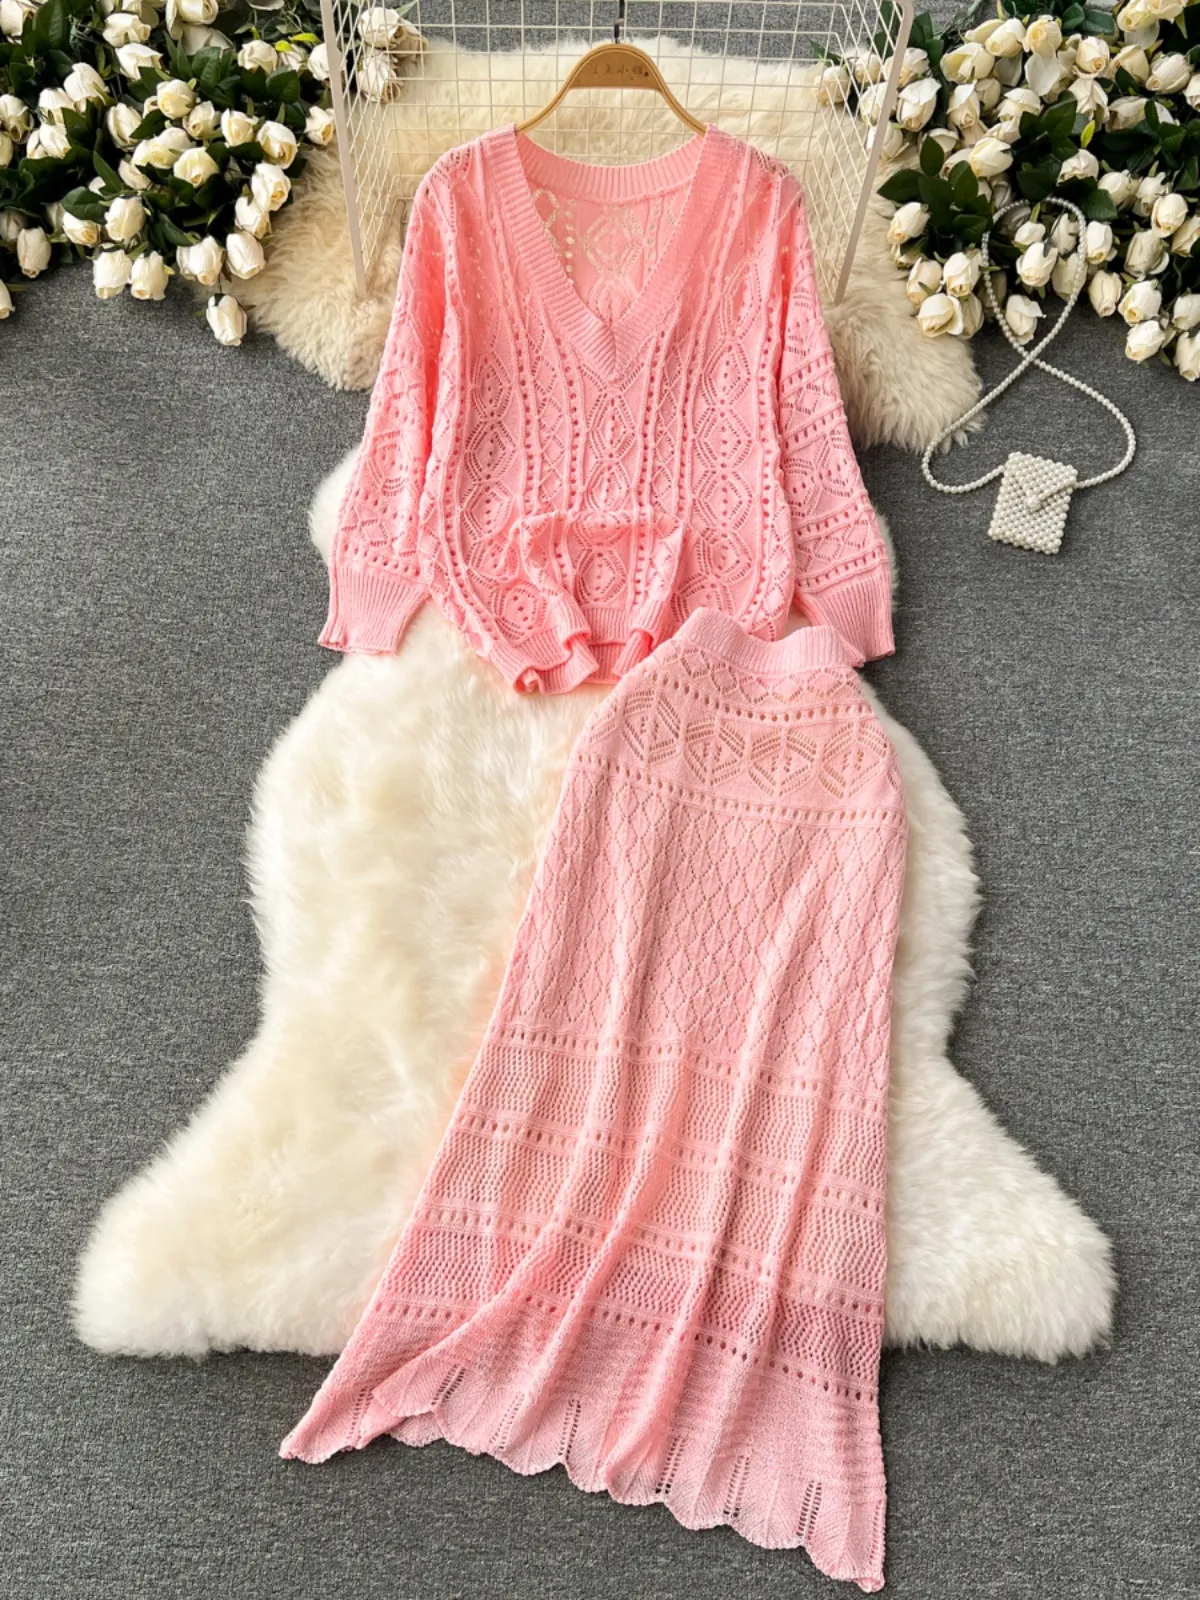 Korean style gentle style two-piece set, women's design sense hollow knit top, versatile high waisted skirt, spring outfit